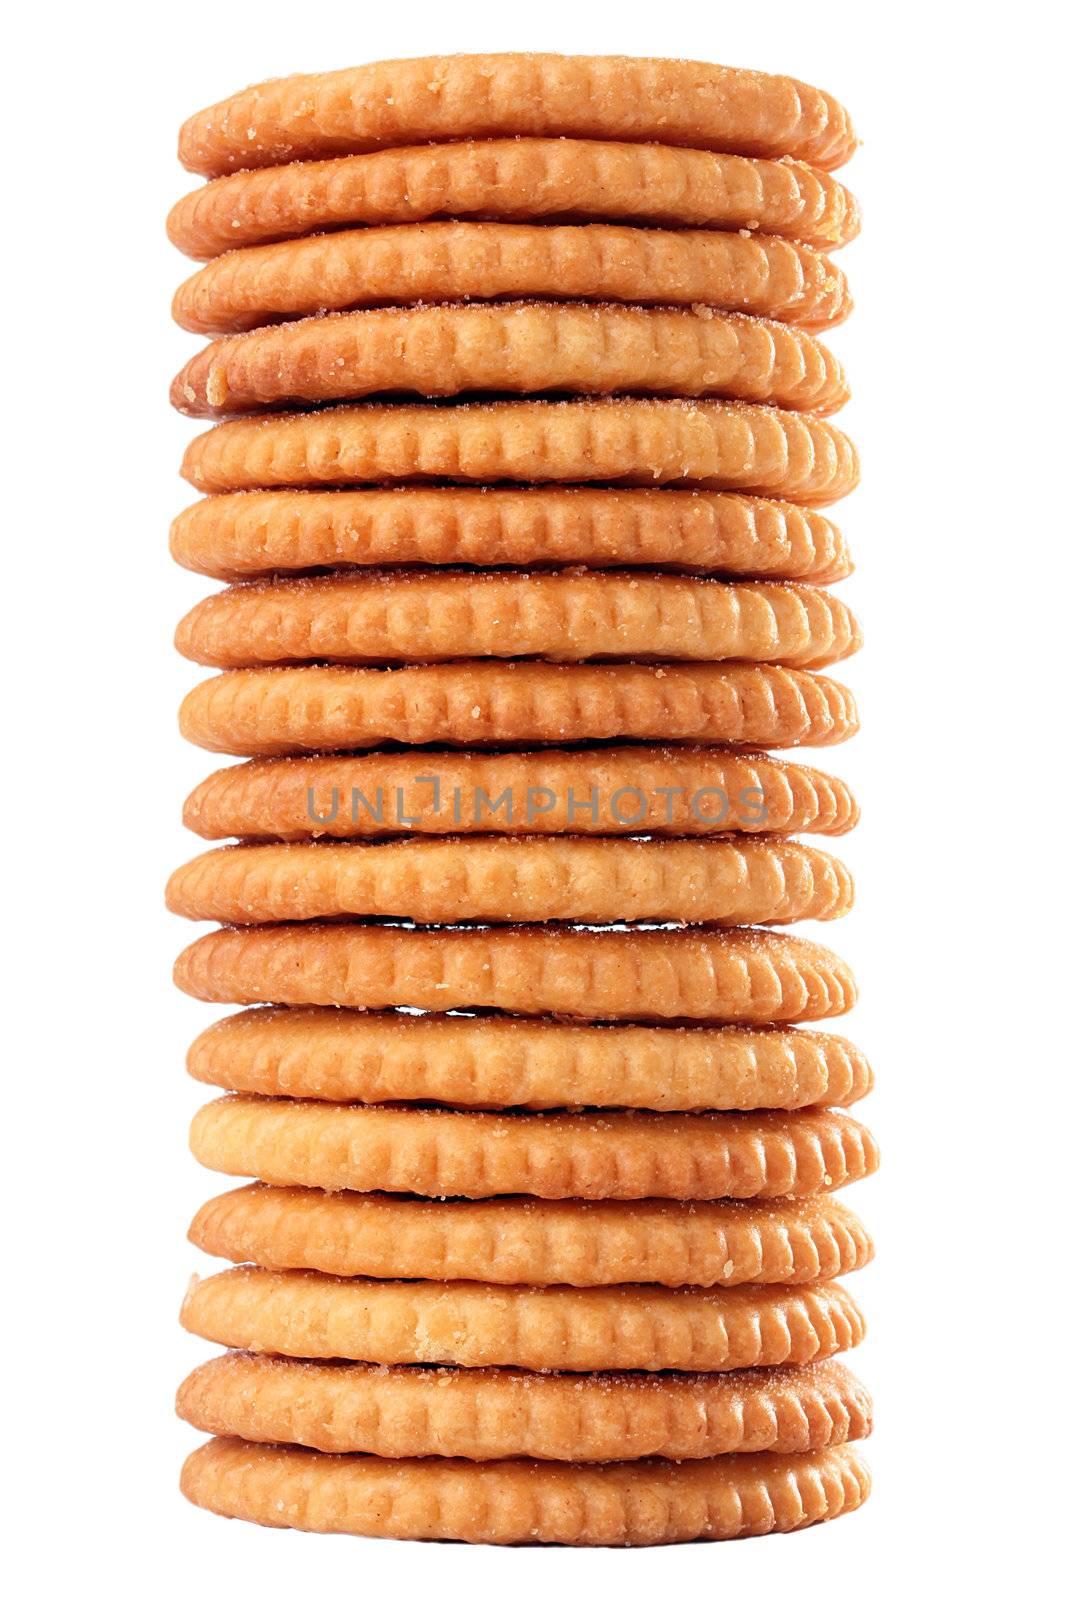 Salty round cookies are combined by a column on a white background.